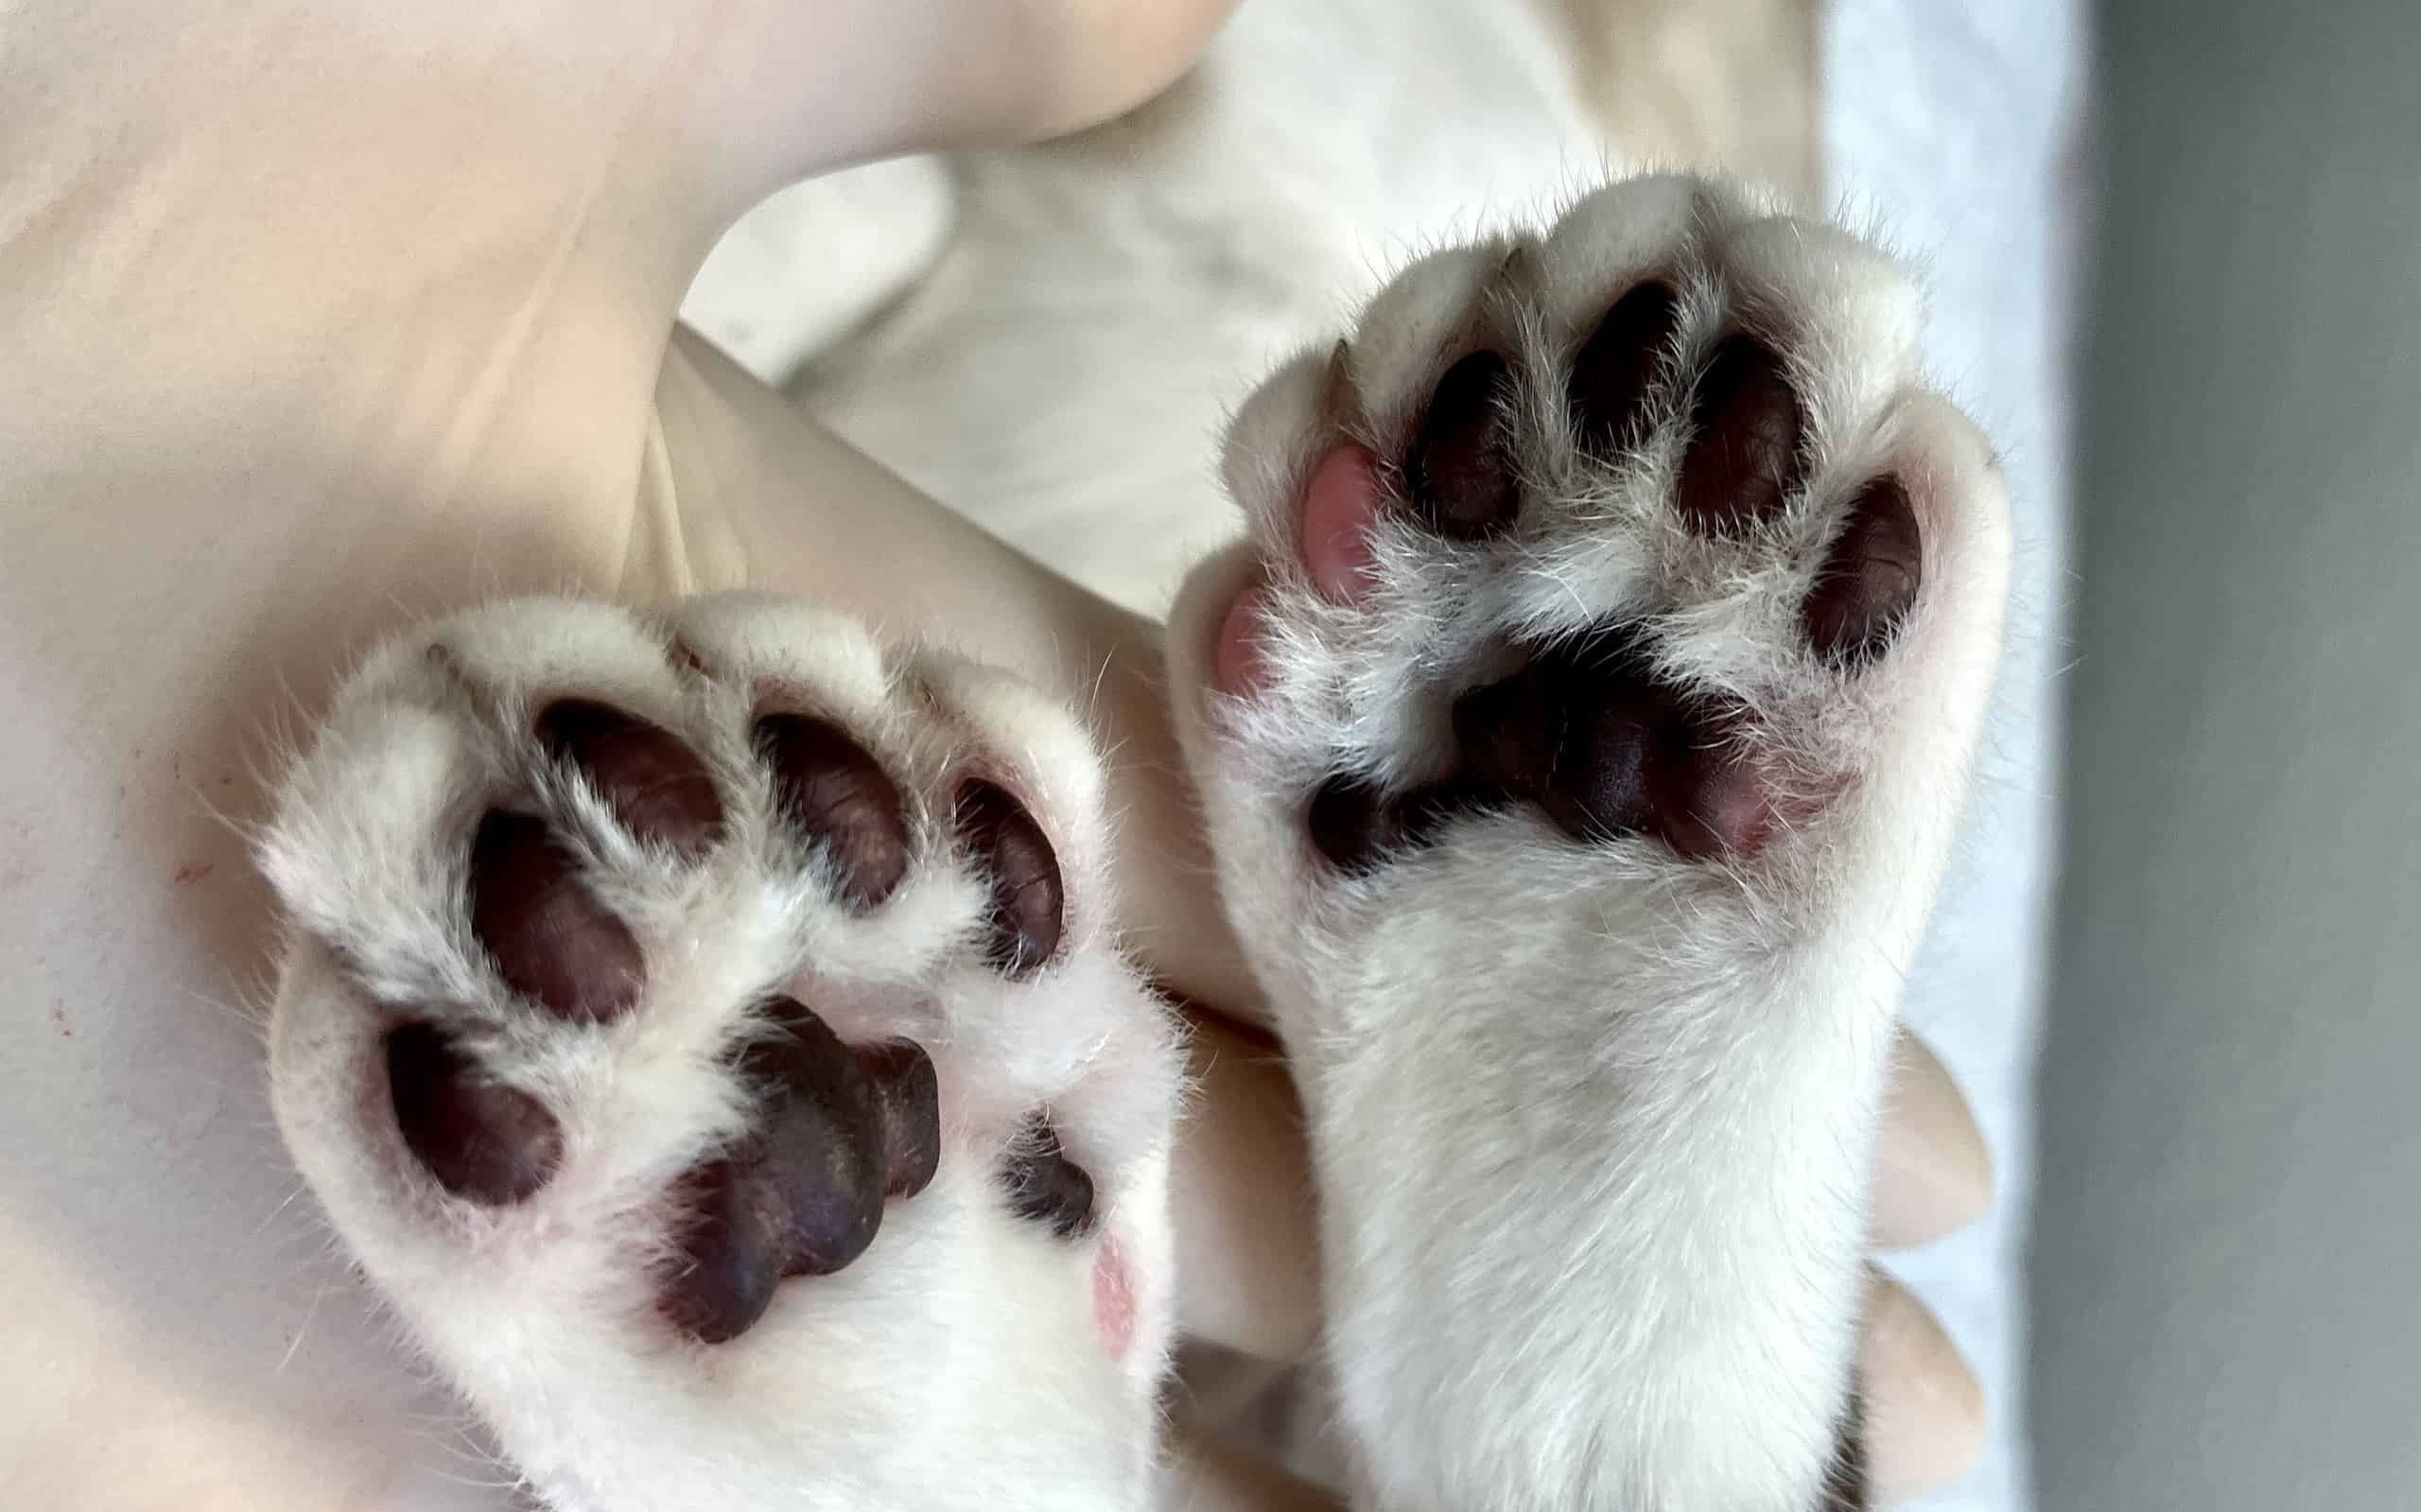 Hind feet of polydactyl cat showing extra toes.